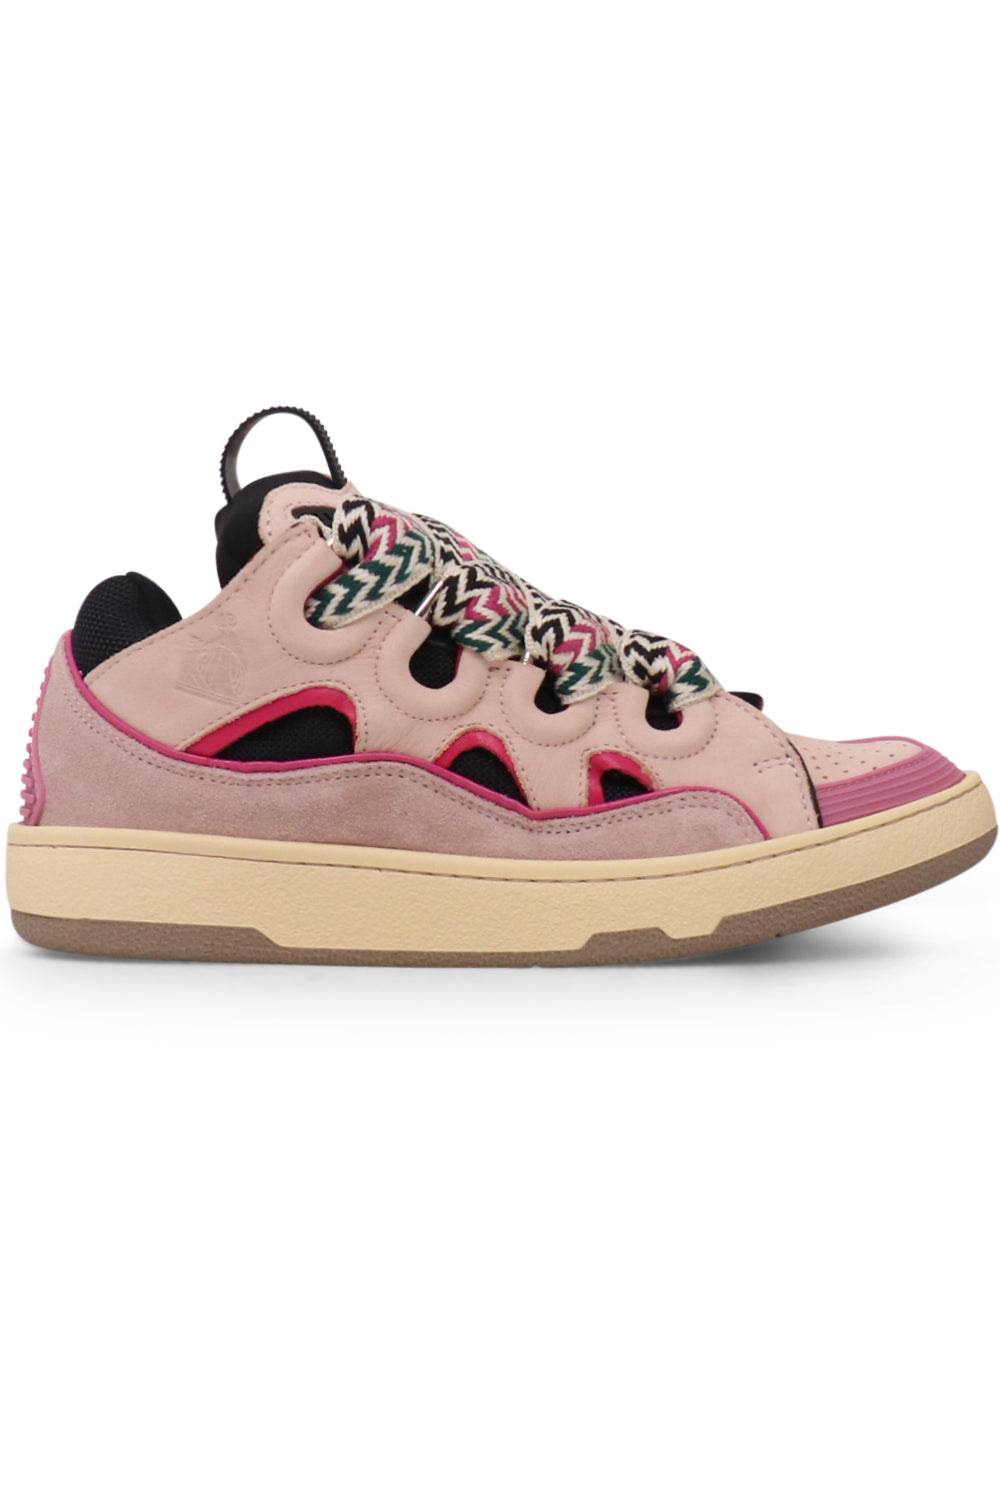 LANVIN SHOES CURB SNEAKERS | PINK/BLACK